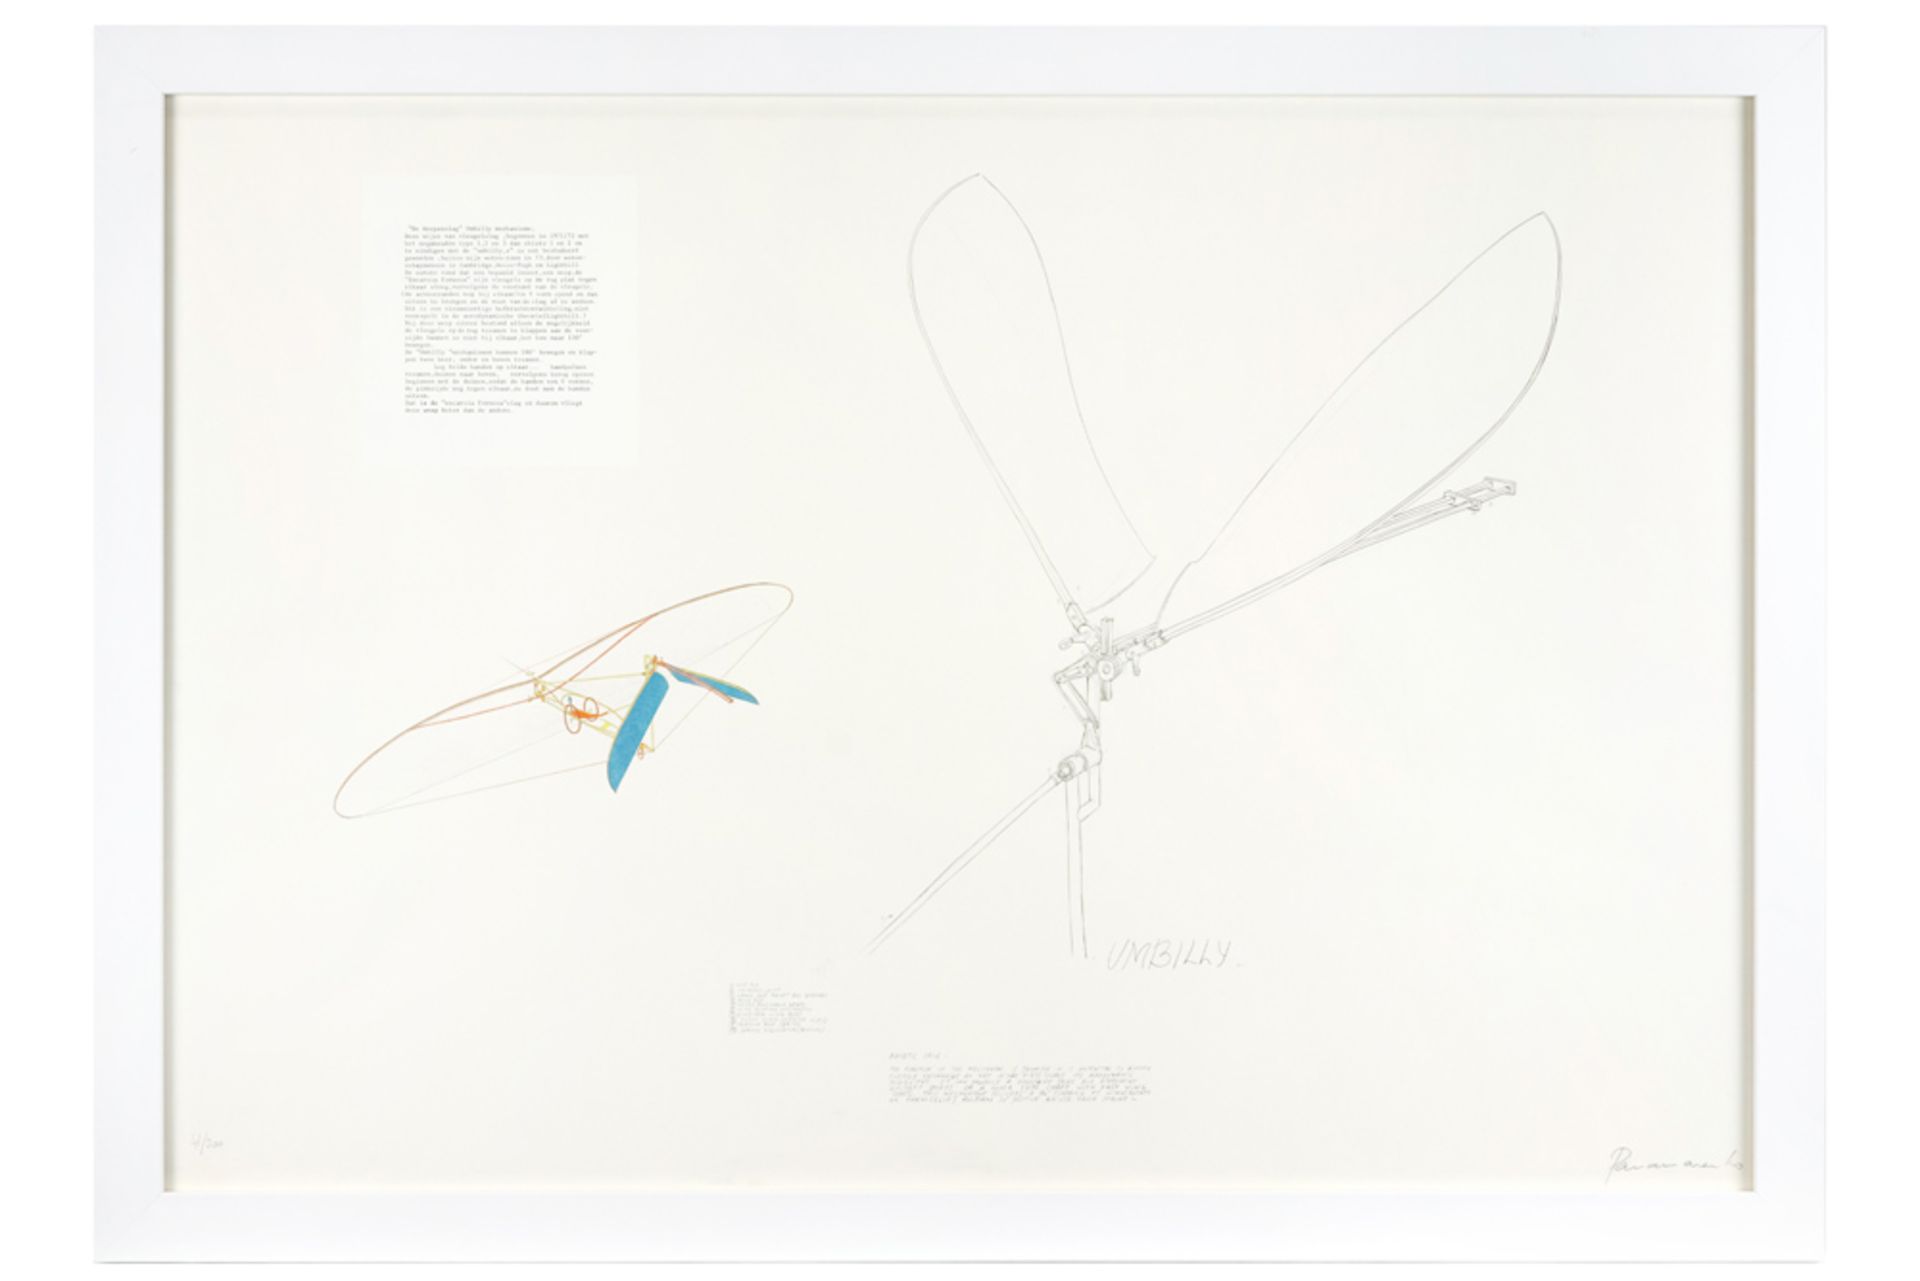 quite large "Umbilly" lithograph (paper on canvas) dd 1976 - signed Panamarenko || PANAMARENKO (PS - Image 3 of 3